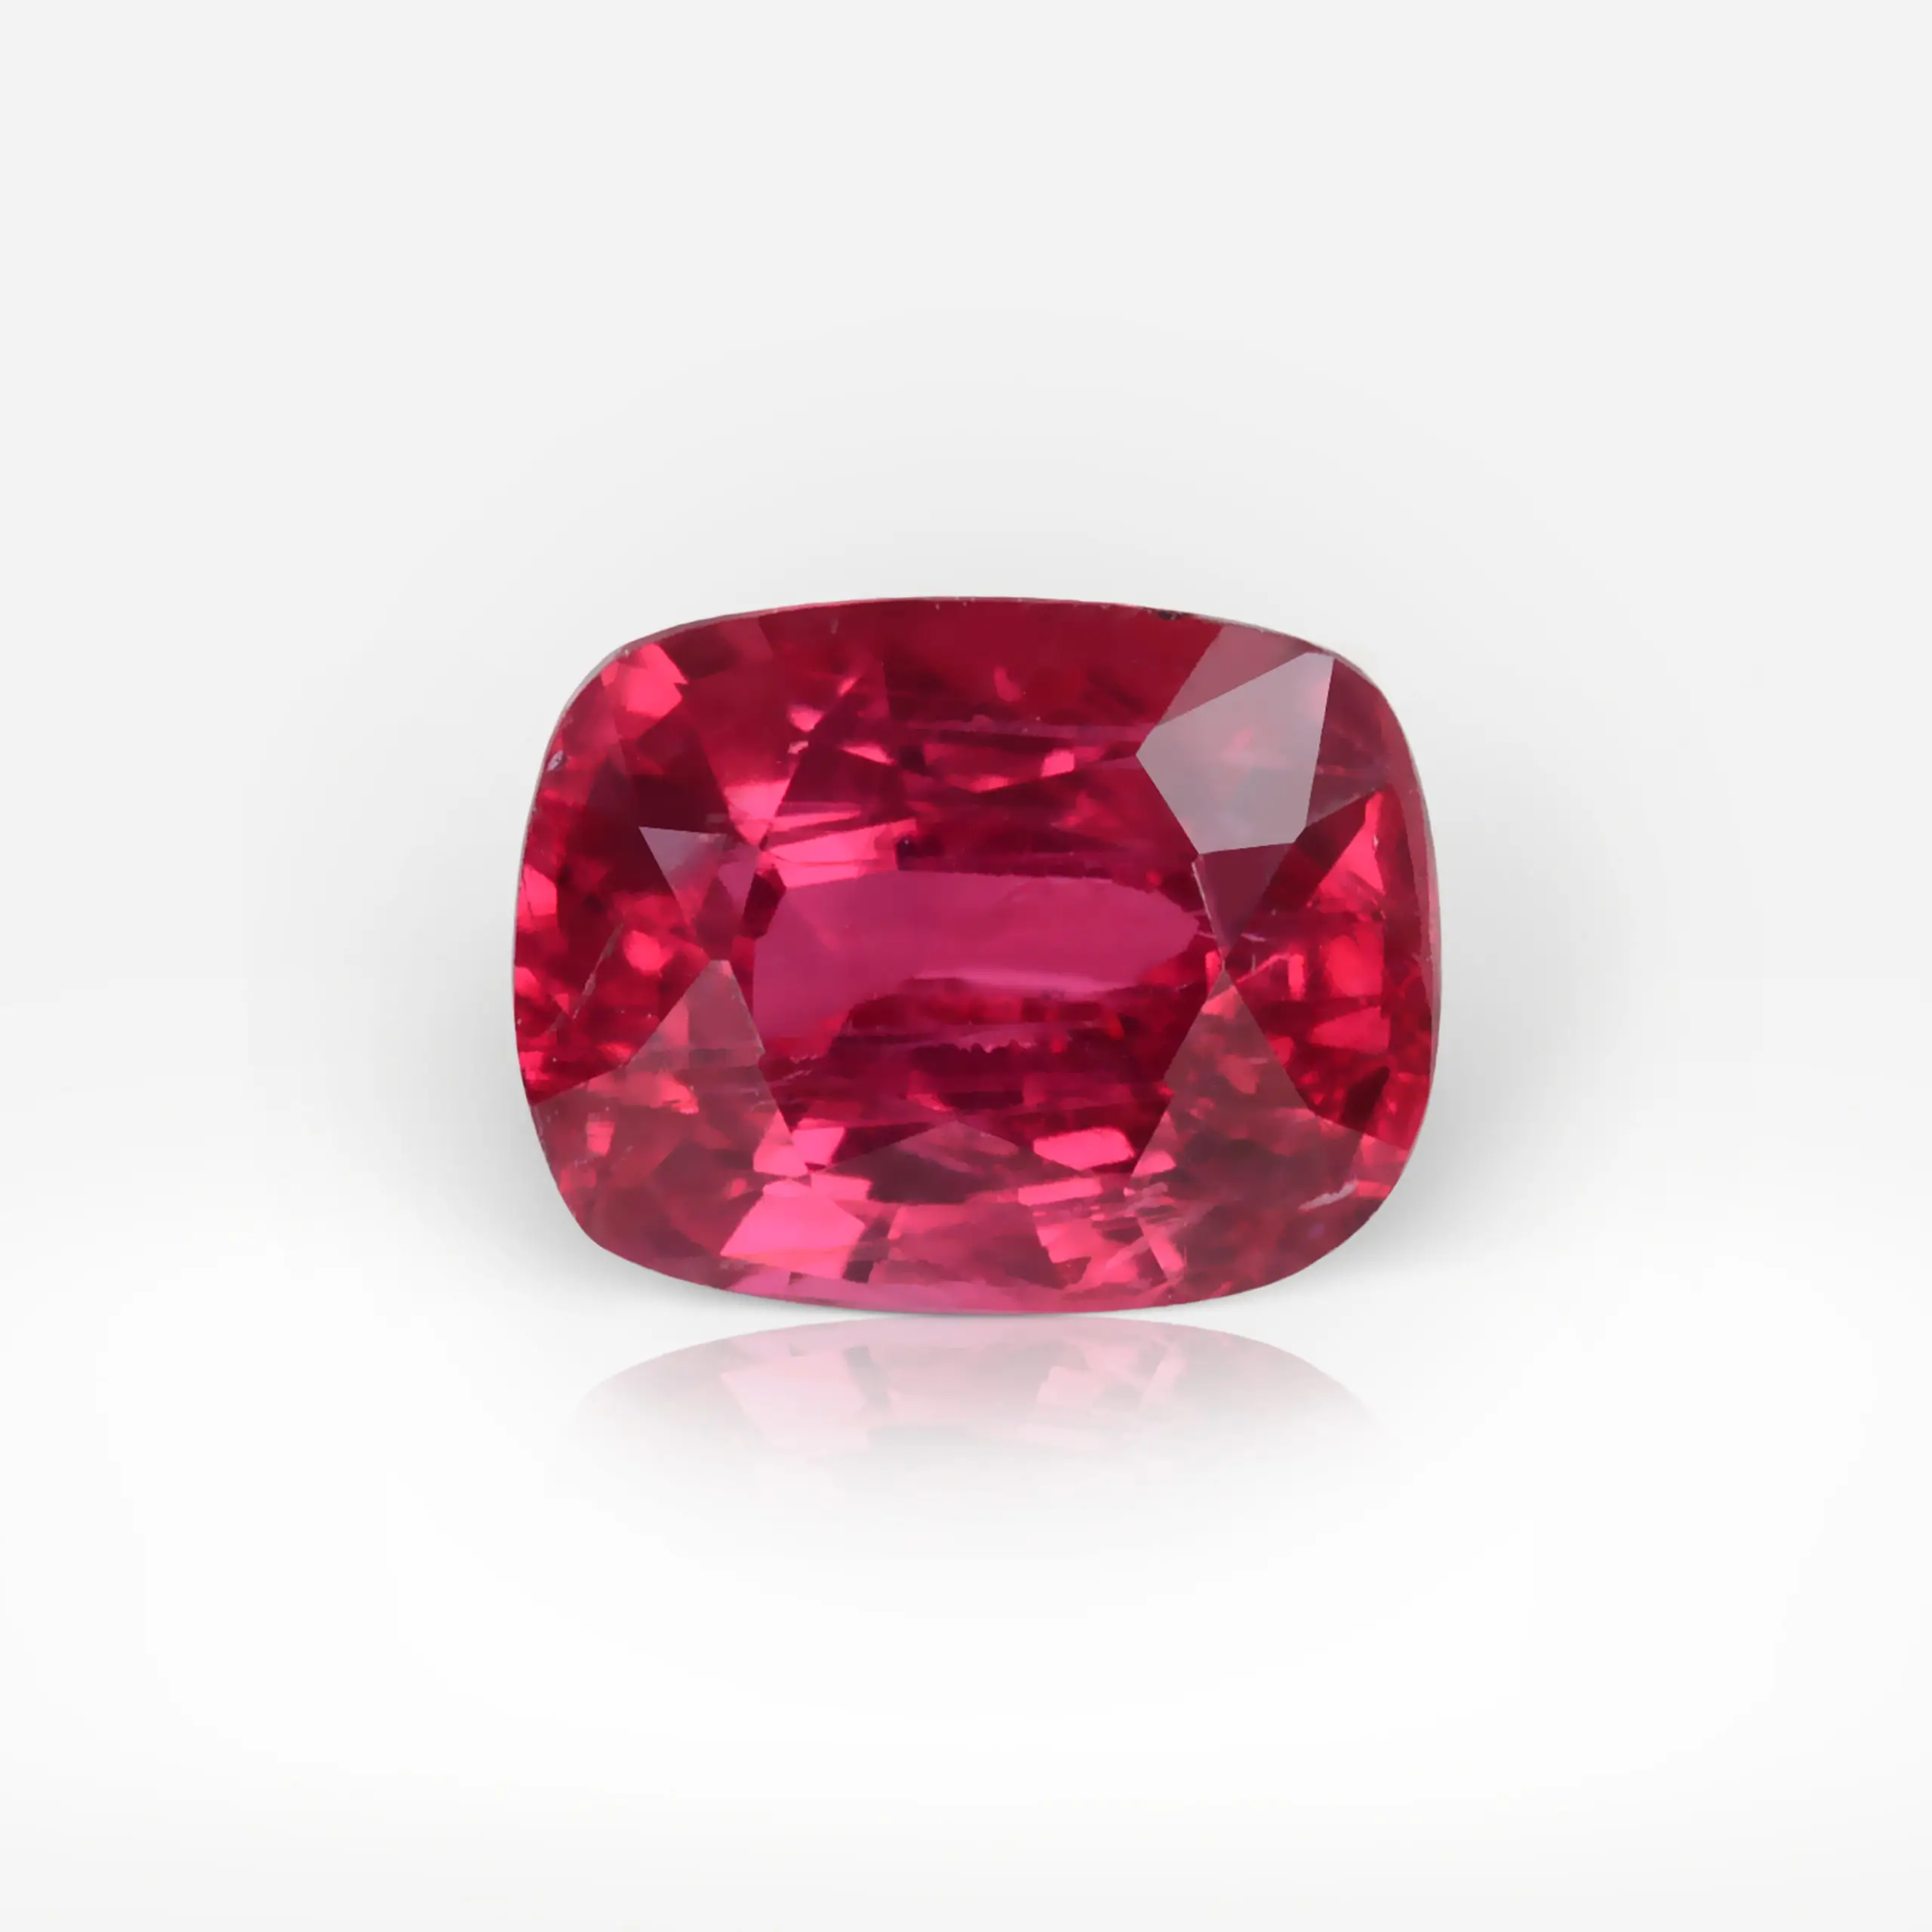 1.04 carat Cushion Shape Vivid Red Mozambique Ruby - picture 1